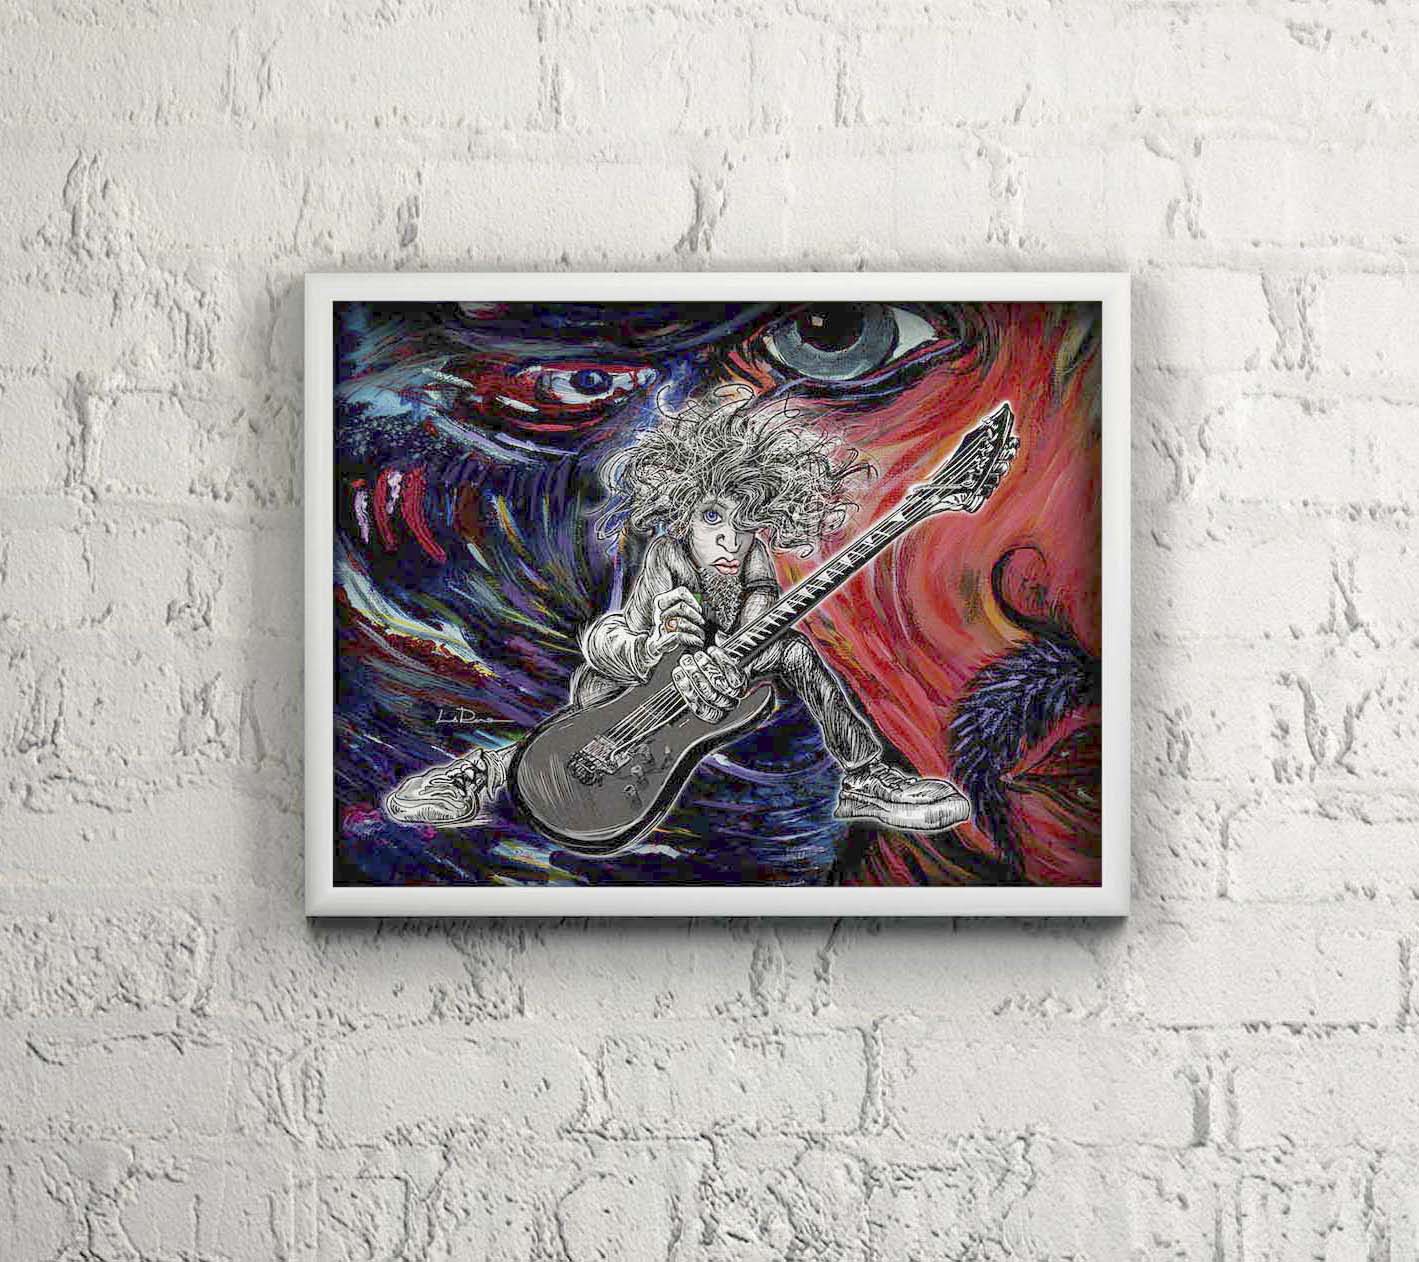 Hair Guitar mixed media illustration character design by Doug LaRue in a white wooden frame on white brick wall